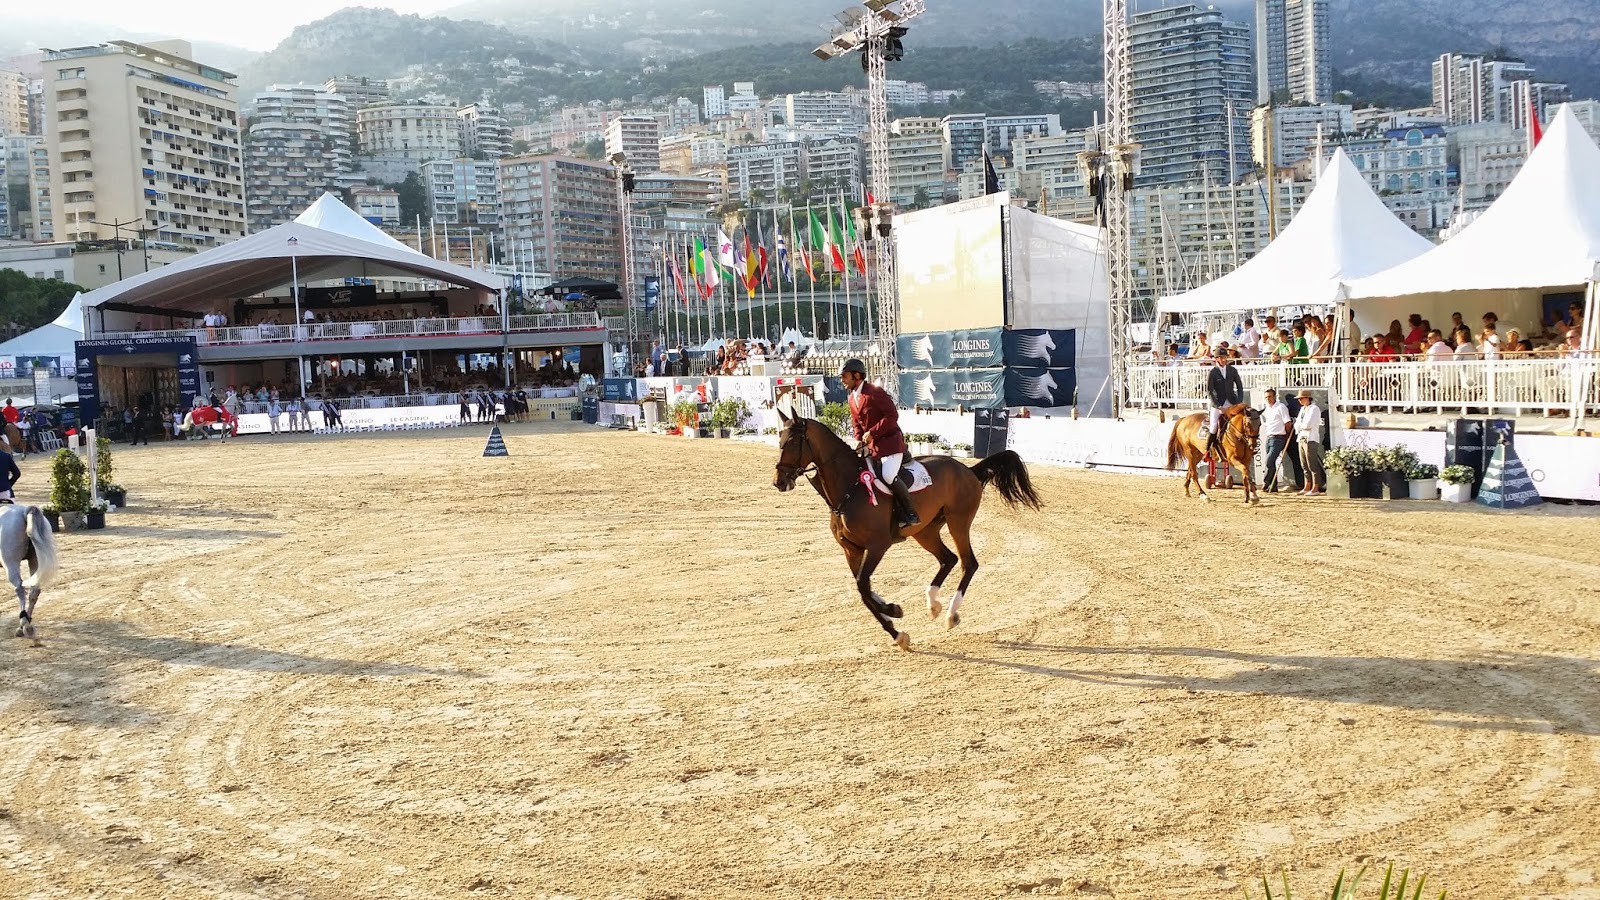 LONGINES Conquest, Global Champions Tour 2014 Montecarlo, pro-am cup, equitazione, show jumping